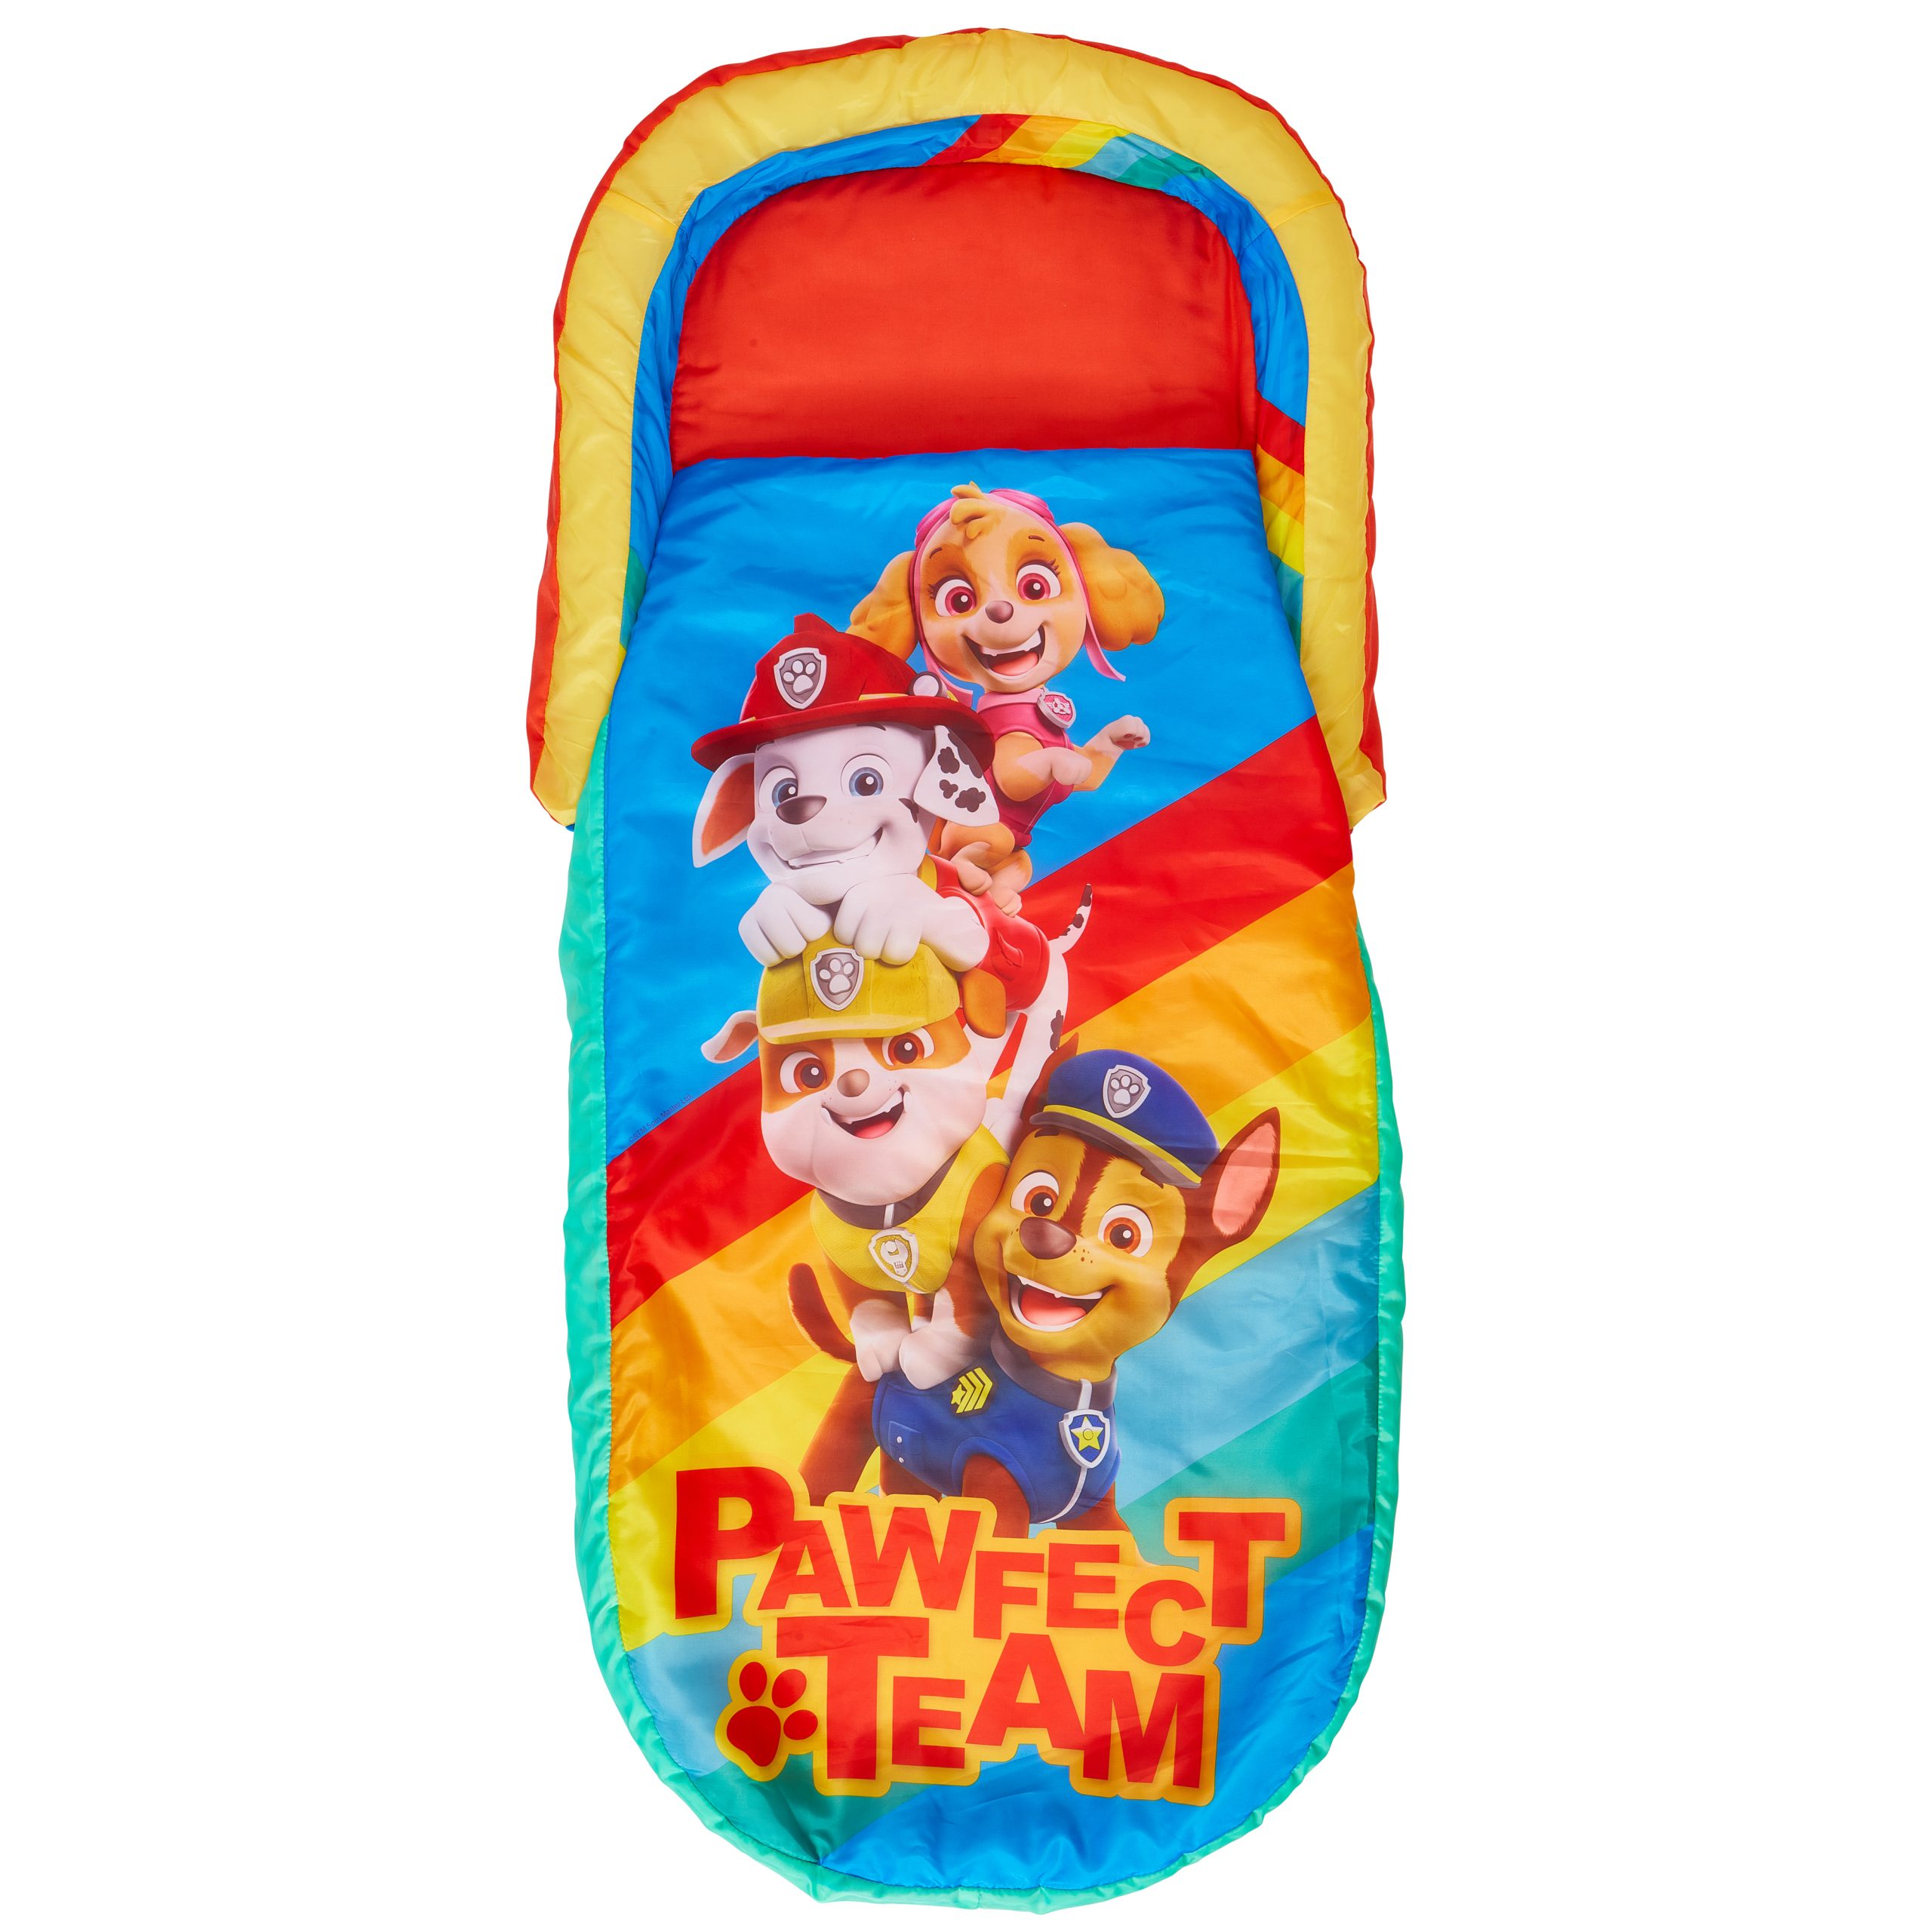 Readybed Paw Patrol Airbed and Sleeping Bag in One 